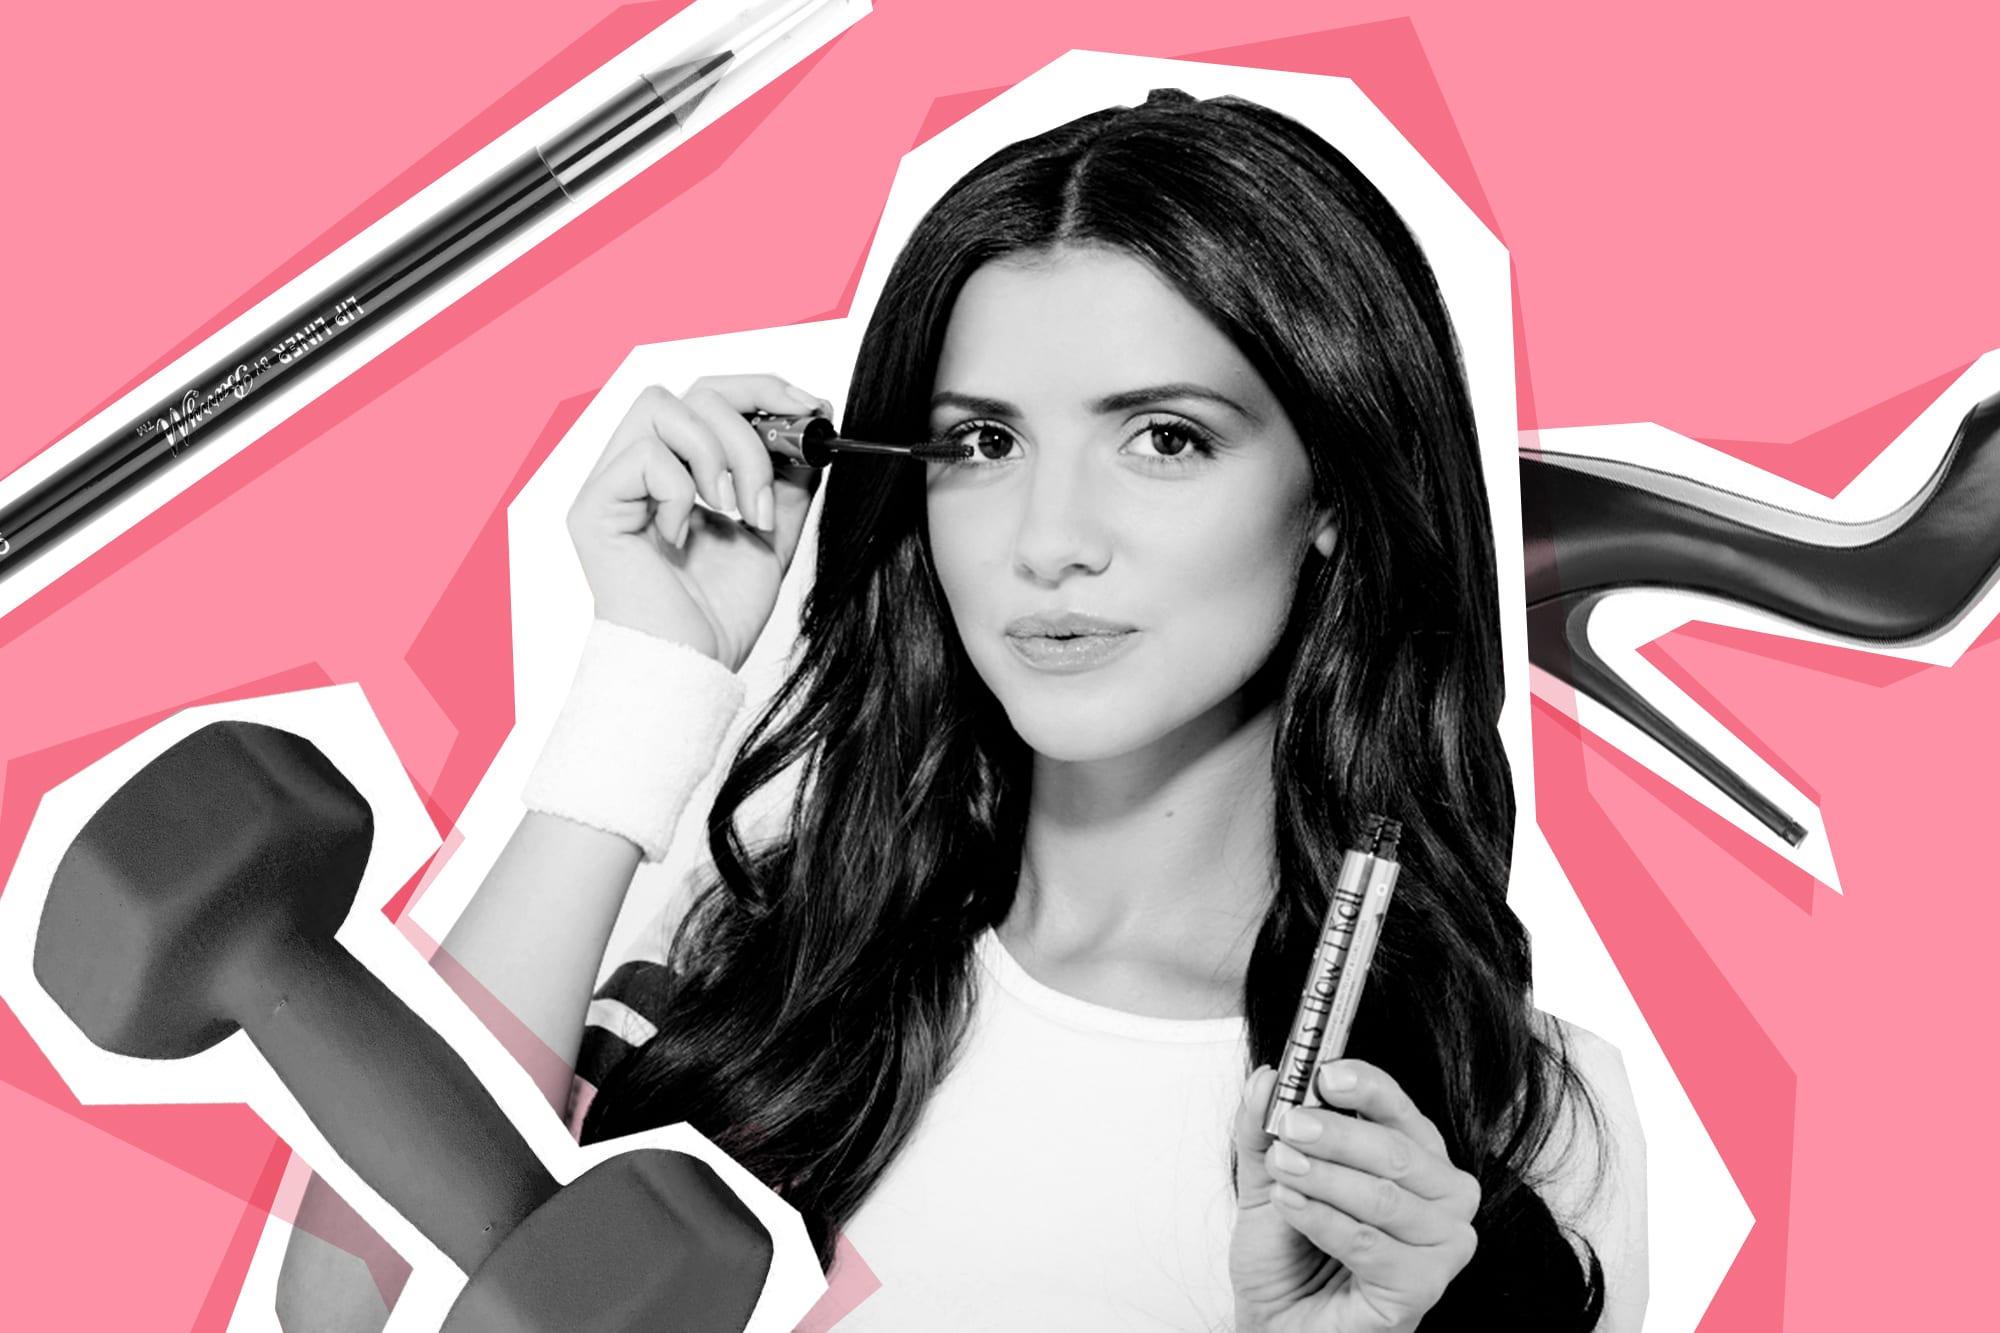 My Daily Grind: Lucy Mecklenburgh, TV Personality & Fitness Guru